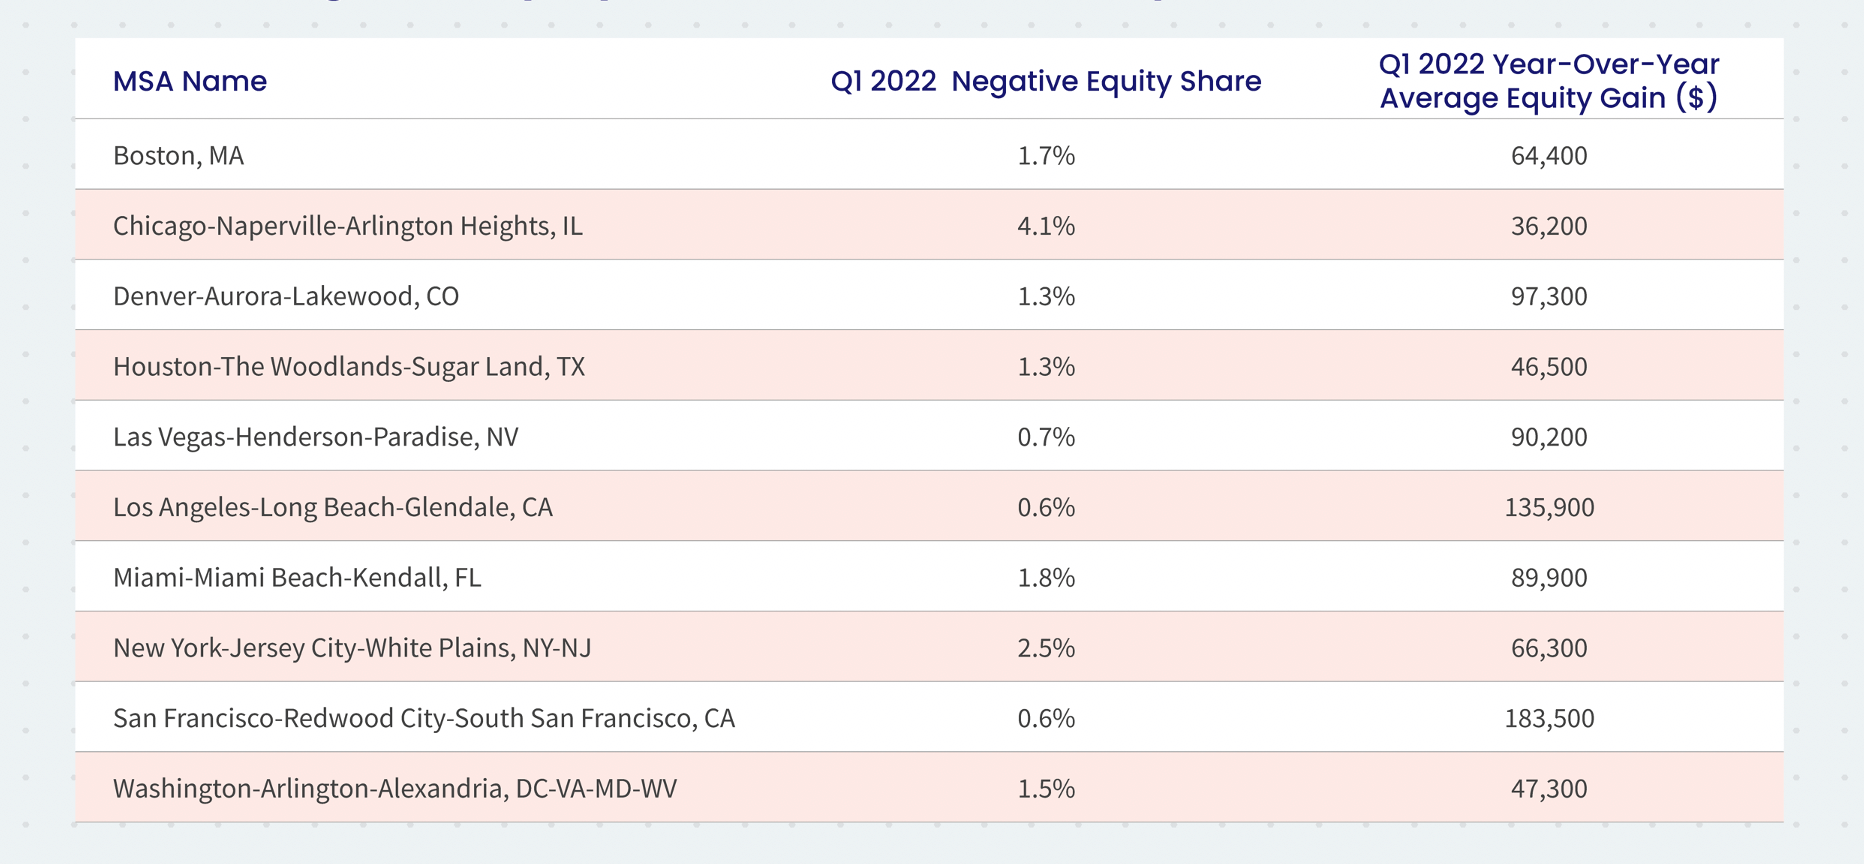 Figure 3: Negative Equity Share for Select Metropolitan Areas